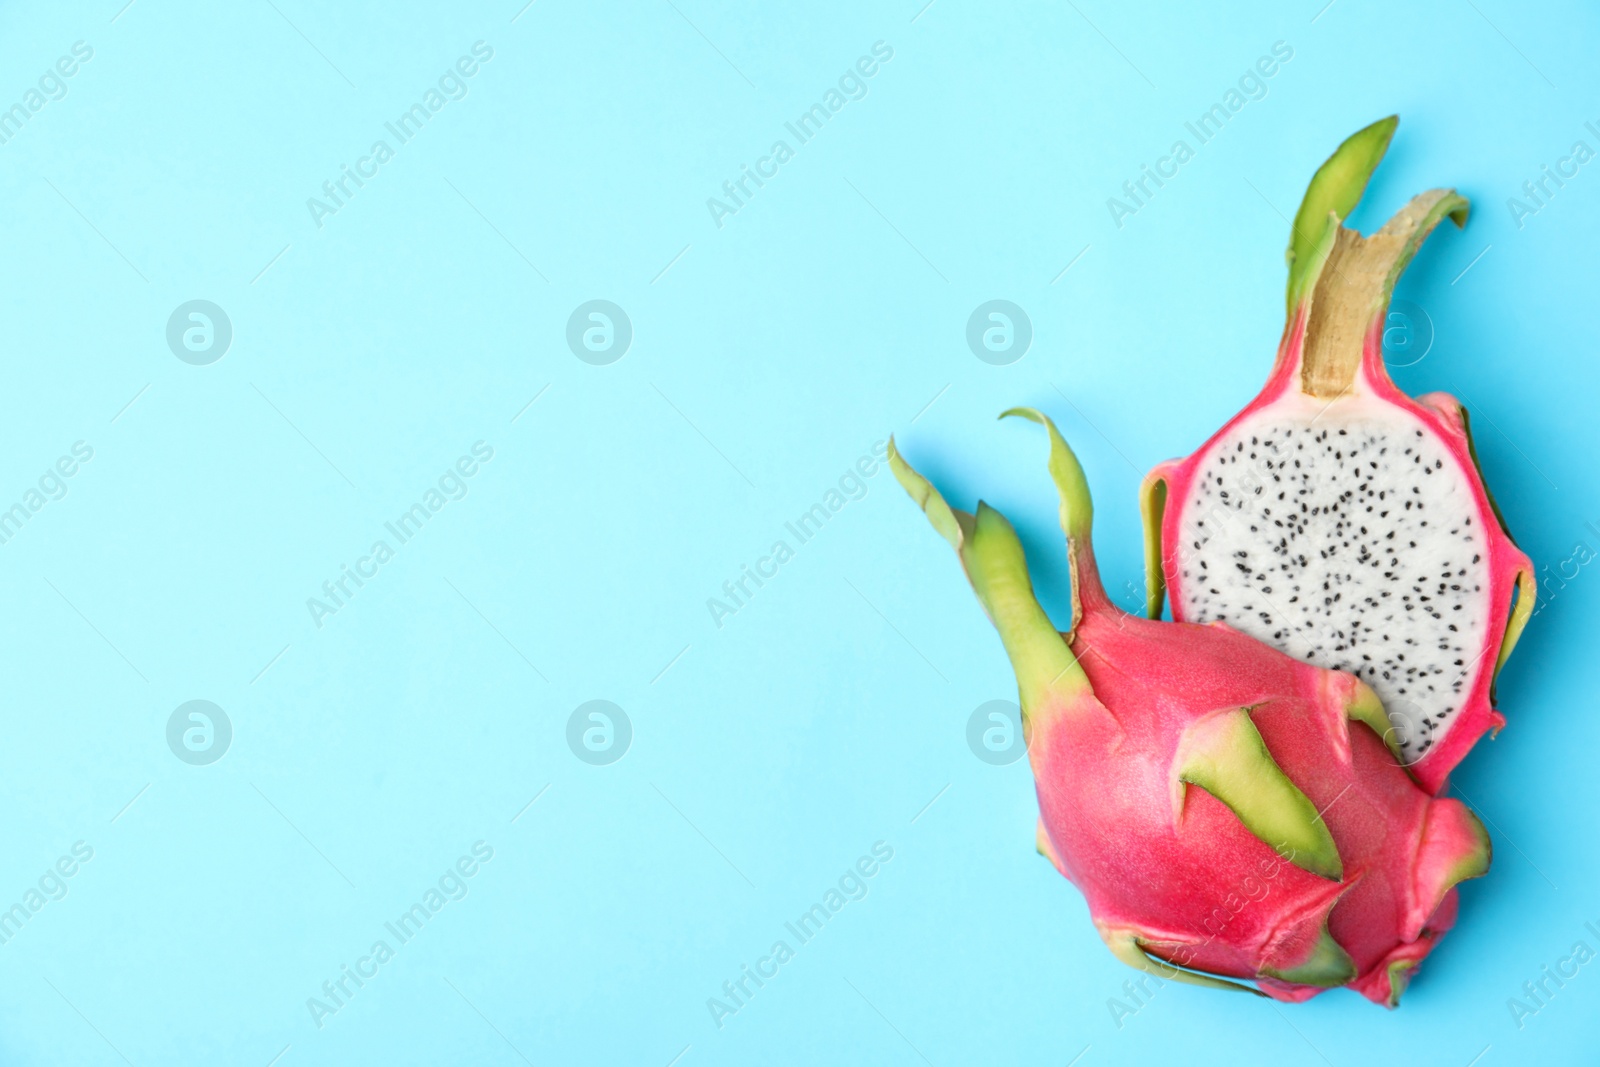 Photo of Halves of delicious ripe dragon fruit (pitahaya) on light blue background, flat lay. Space for text